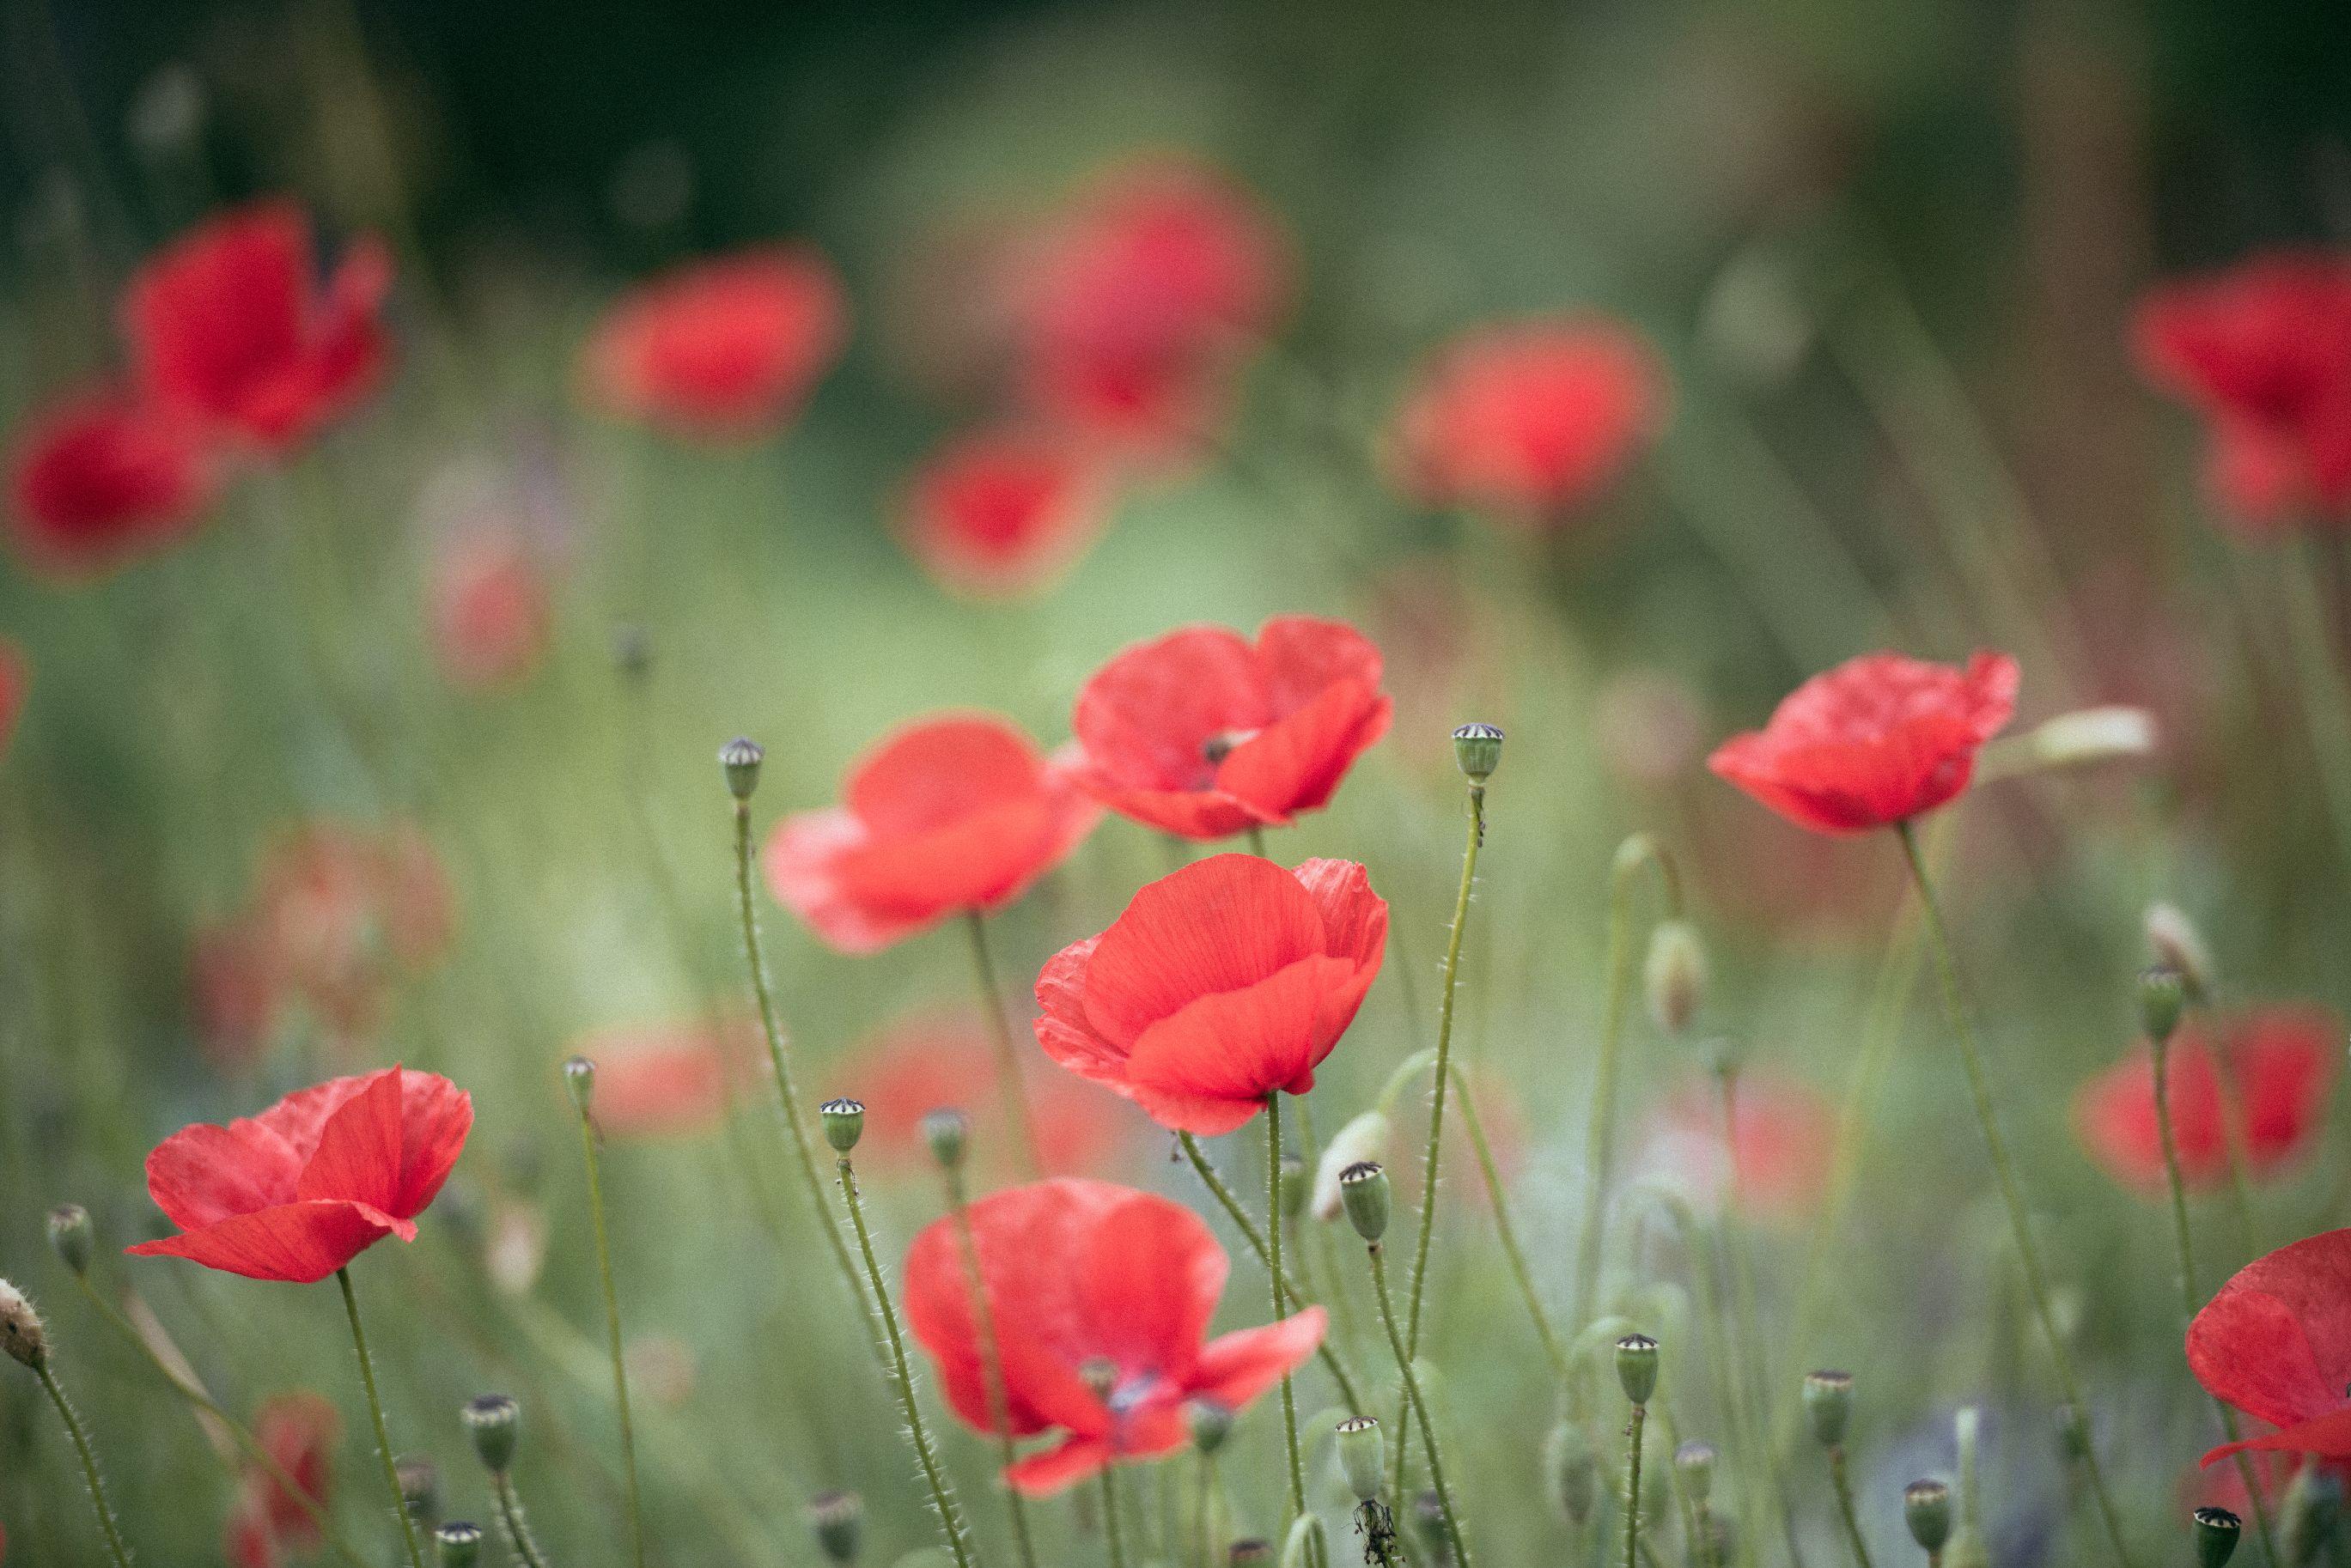 red poppies in a green field